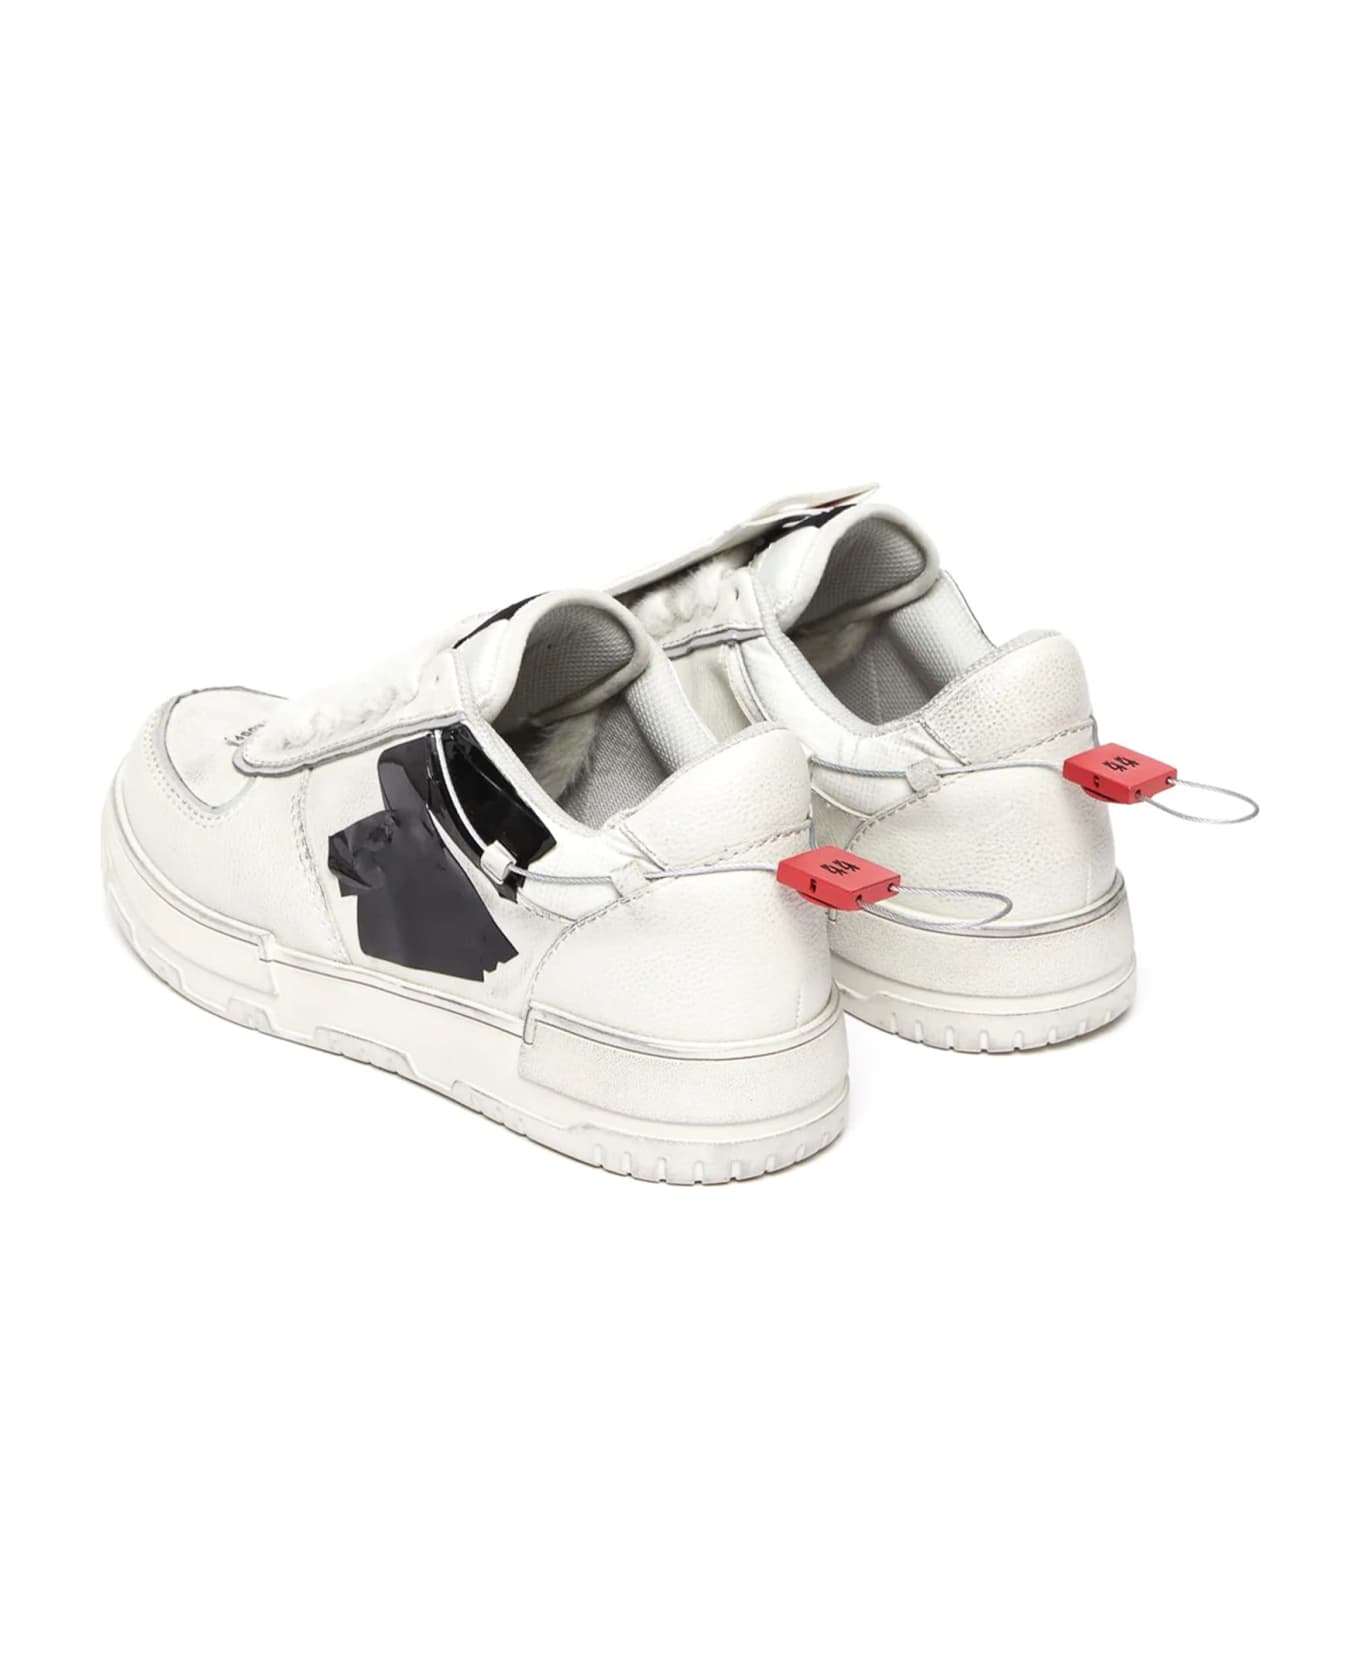 44 Label Group Sneakers White - White